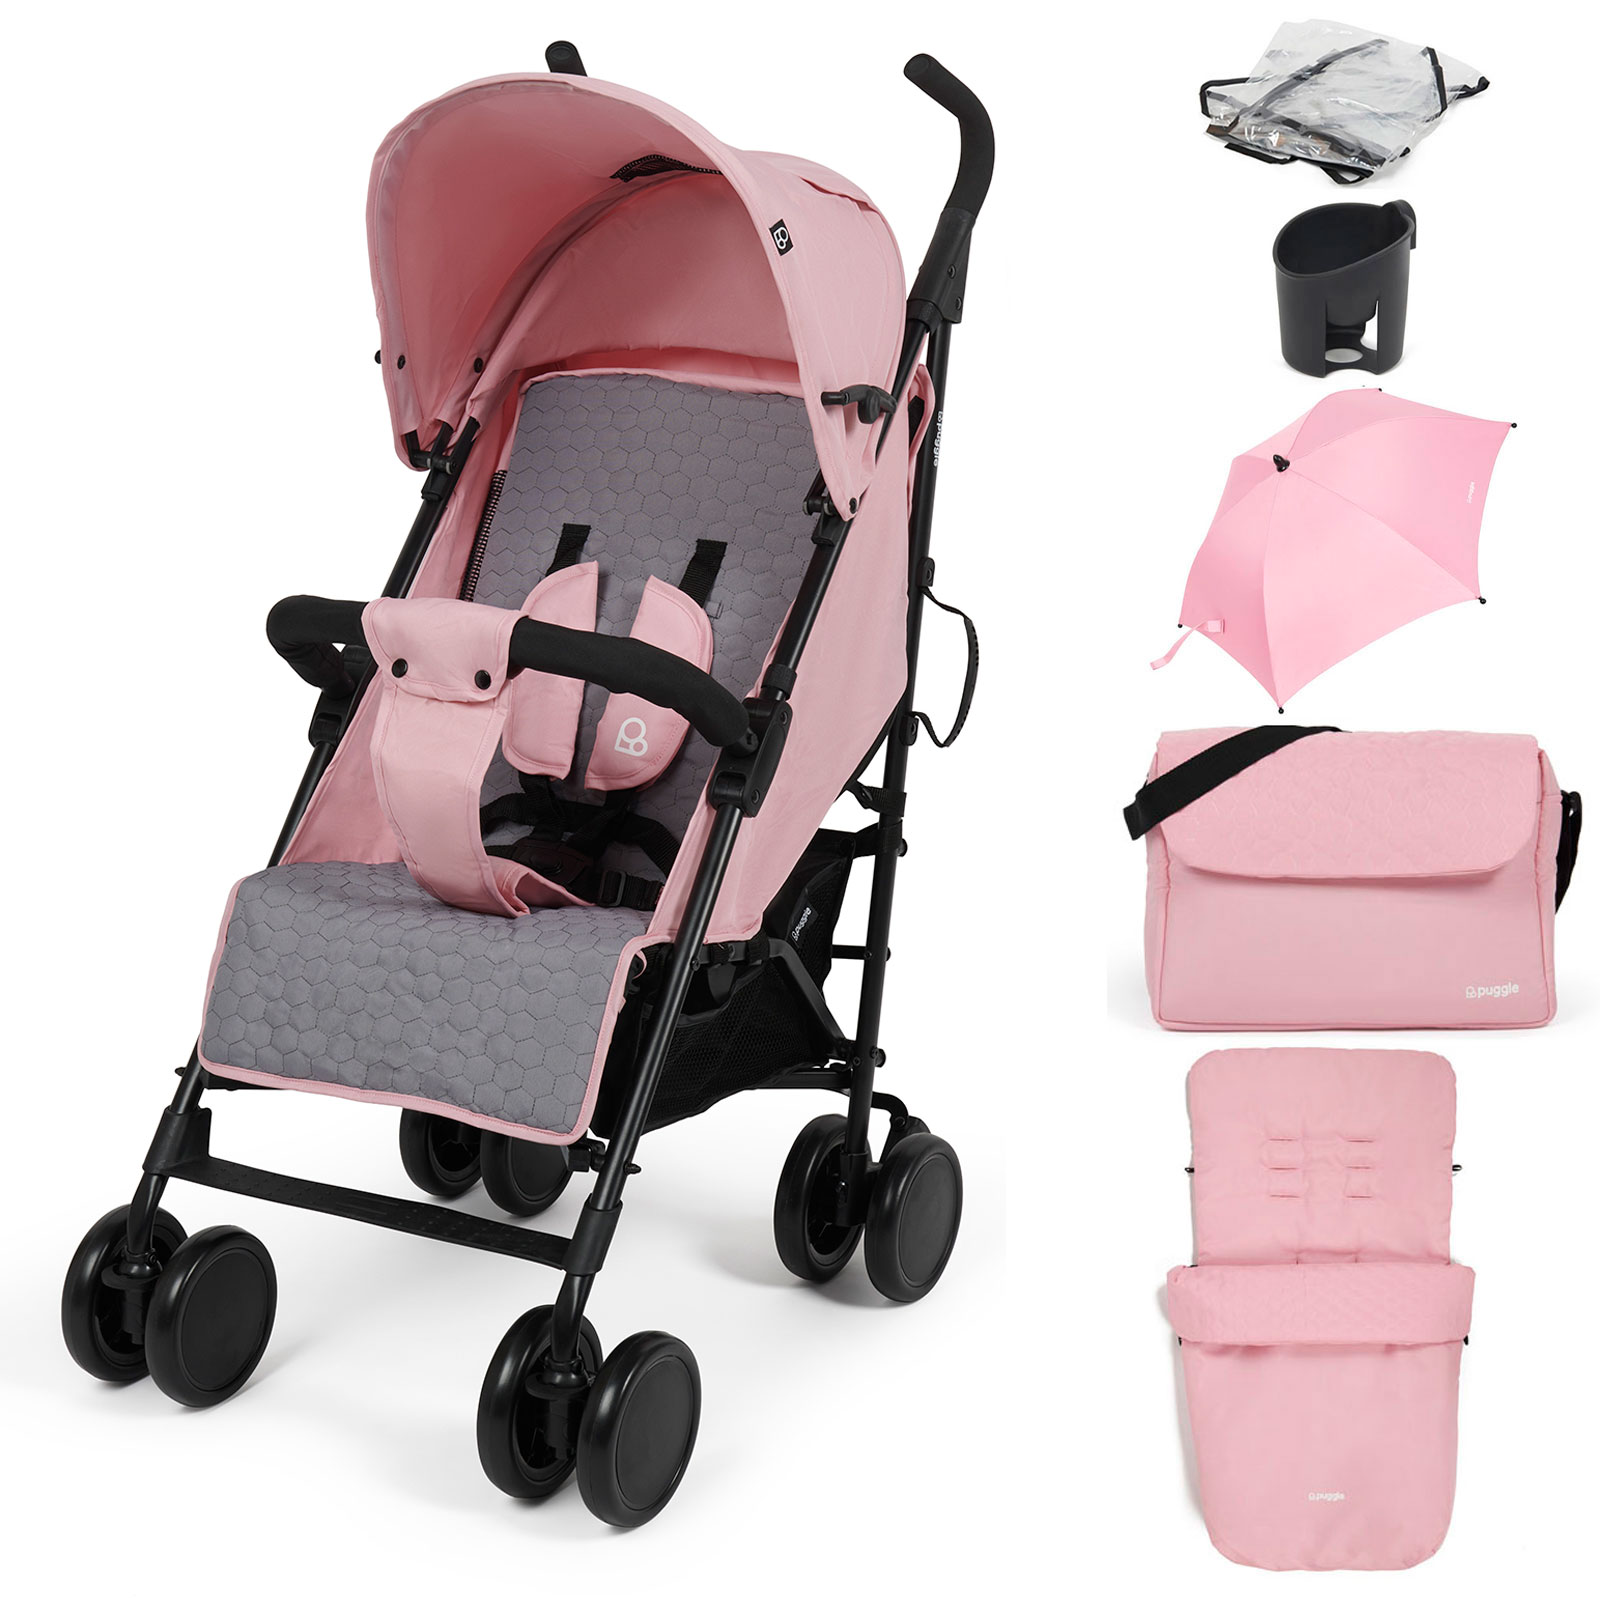 Puggle Litemax Pushchair Stroller with Raincover, Cupholder, Universal Footmuff, Parasol and Changing Bag with Mat - Vintage Pink